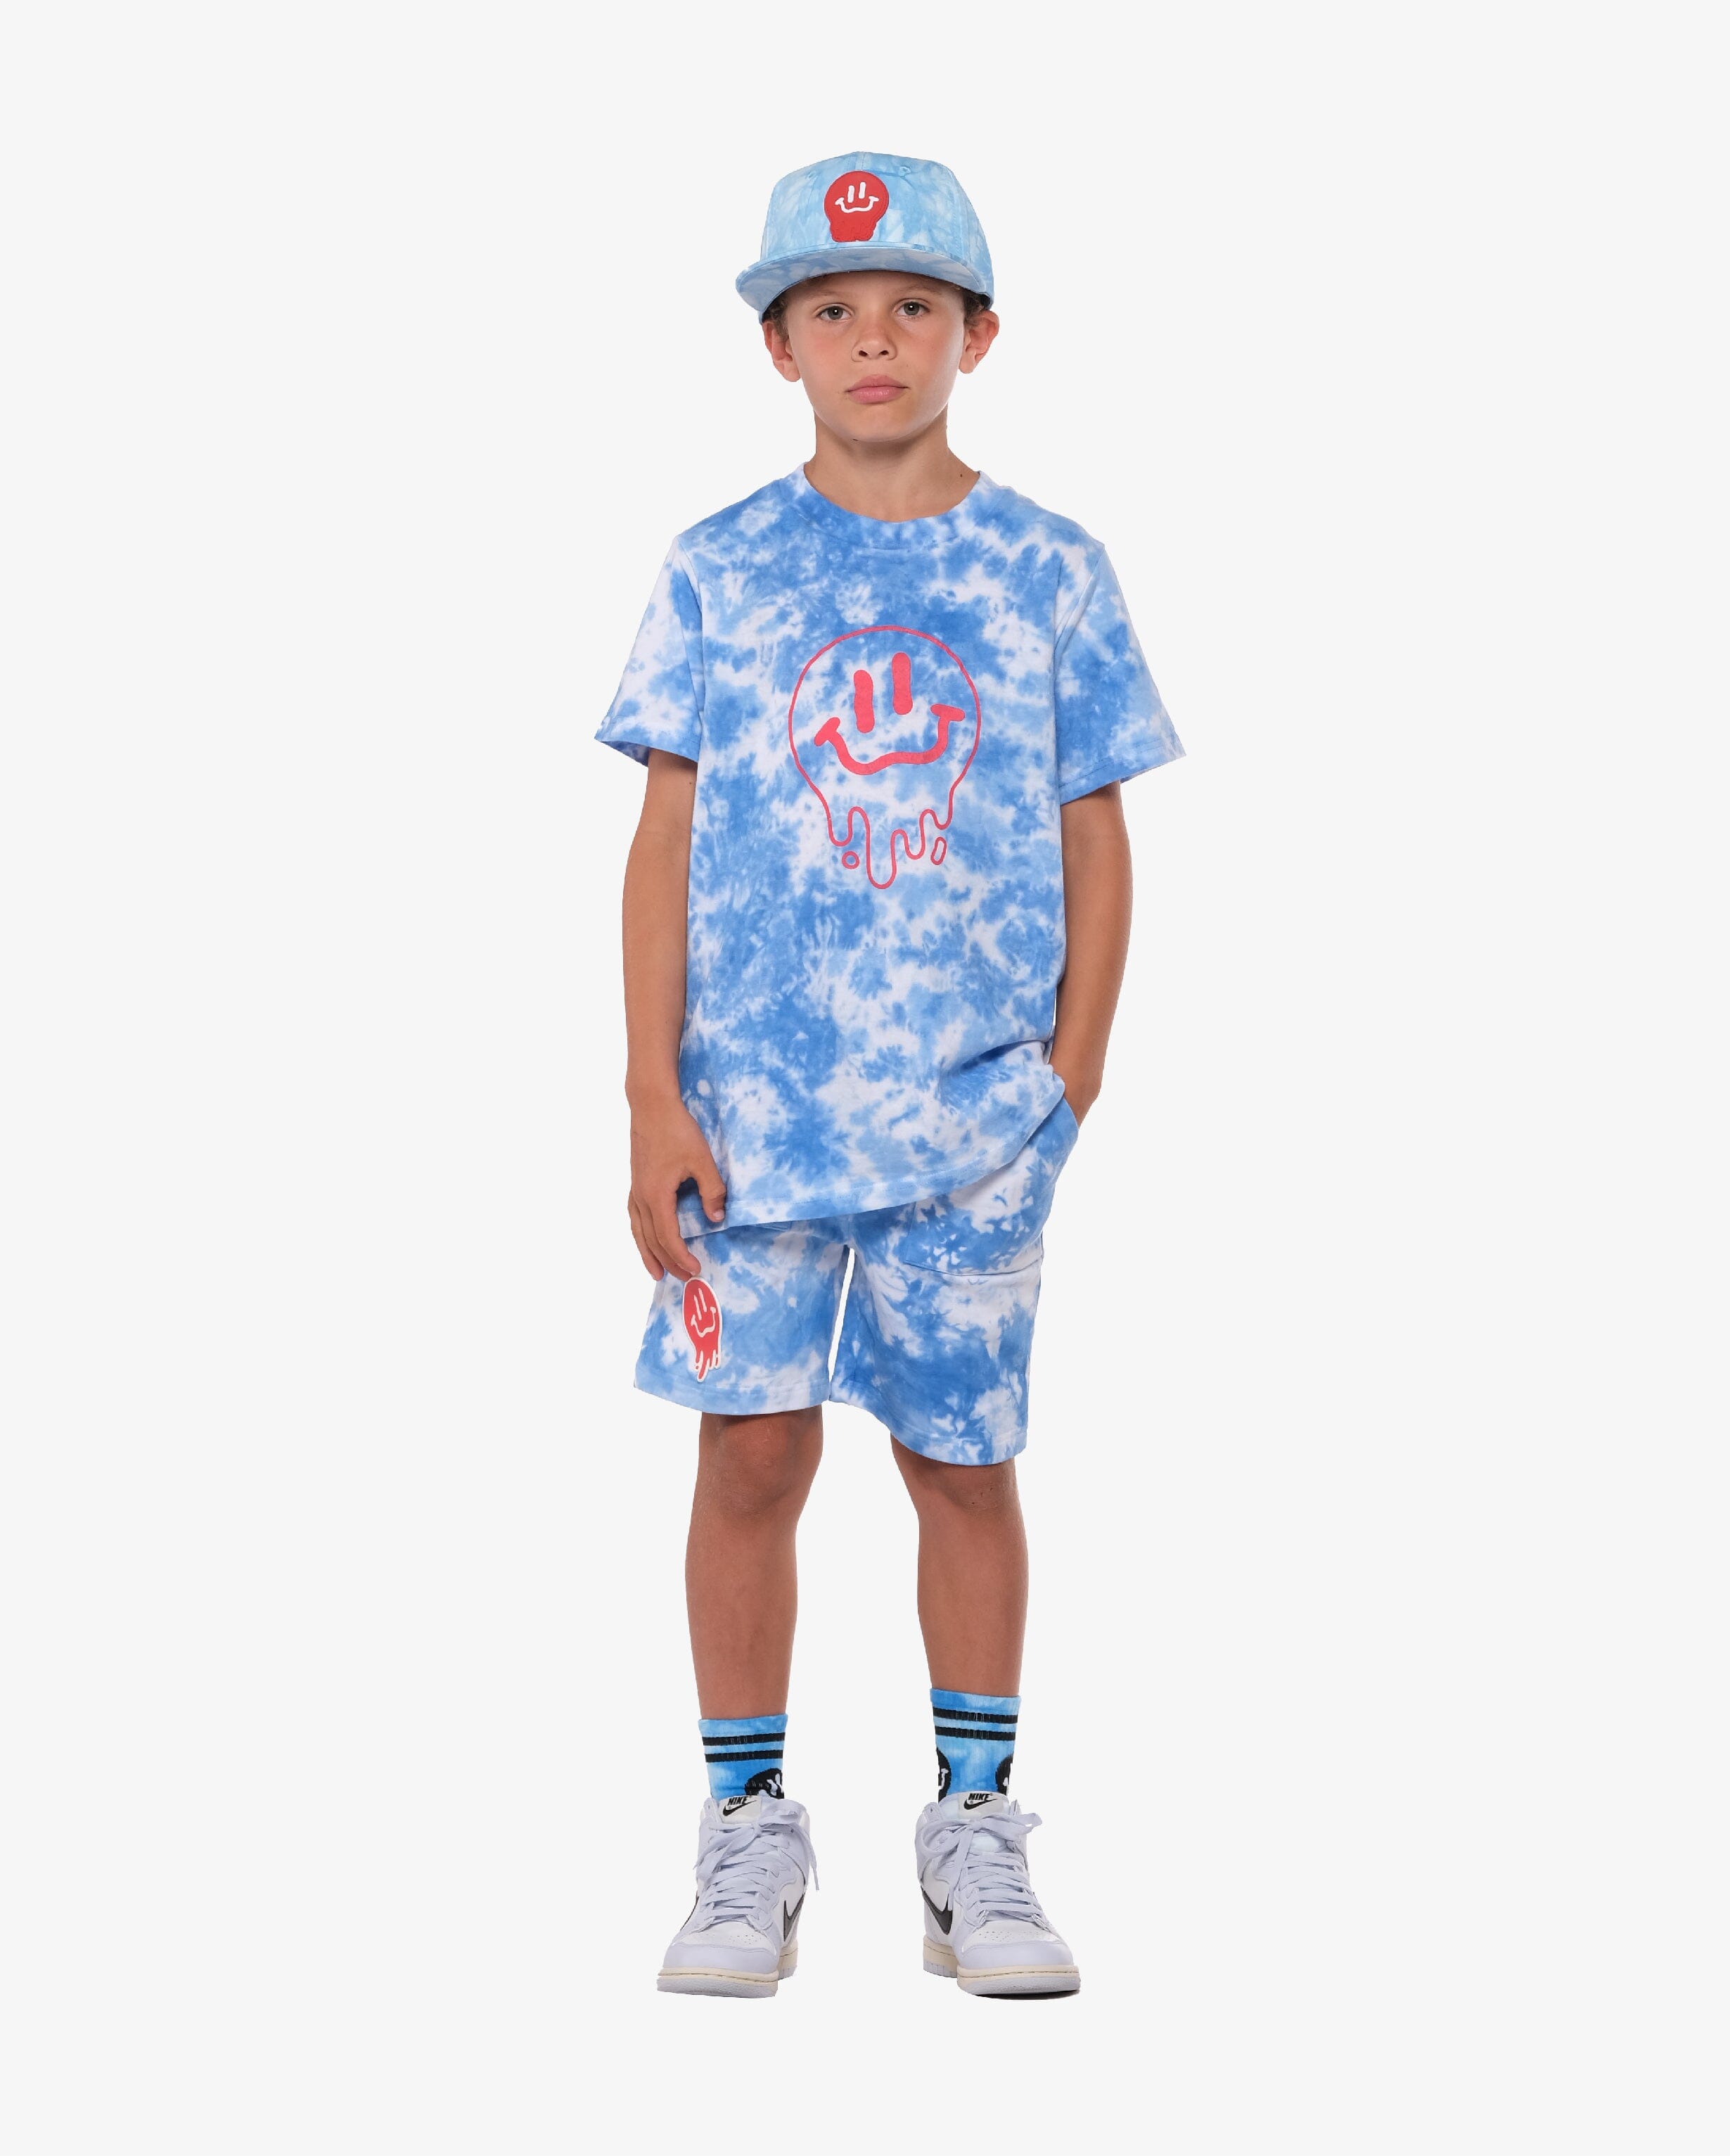 BAND OF BOYS | Drippin in Smiles Tee - Blue Tie Dye Boys Band of Boys